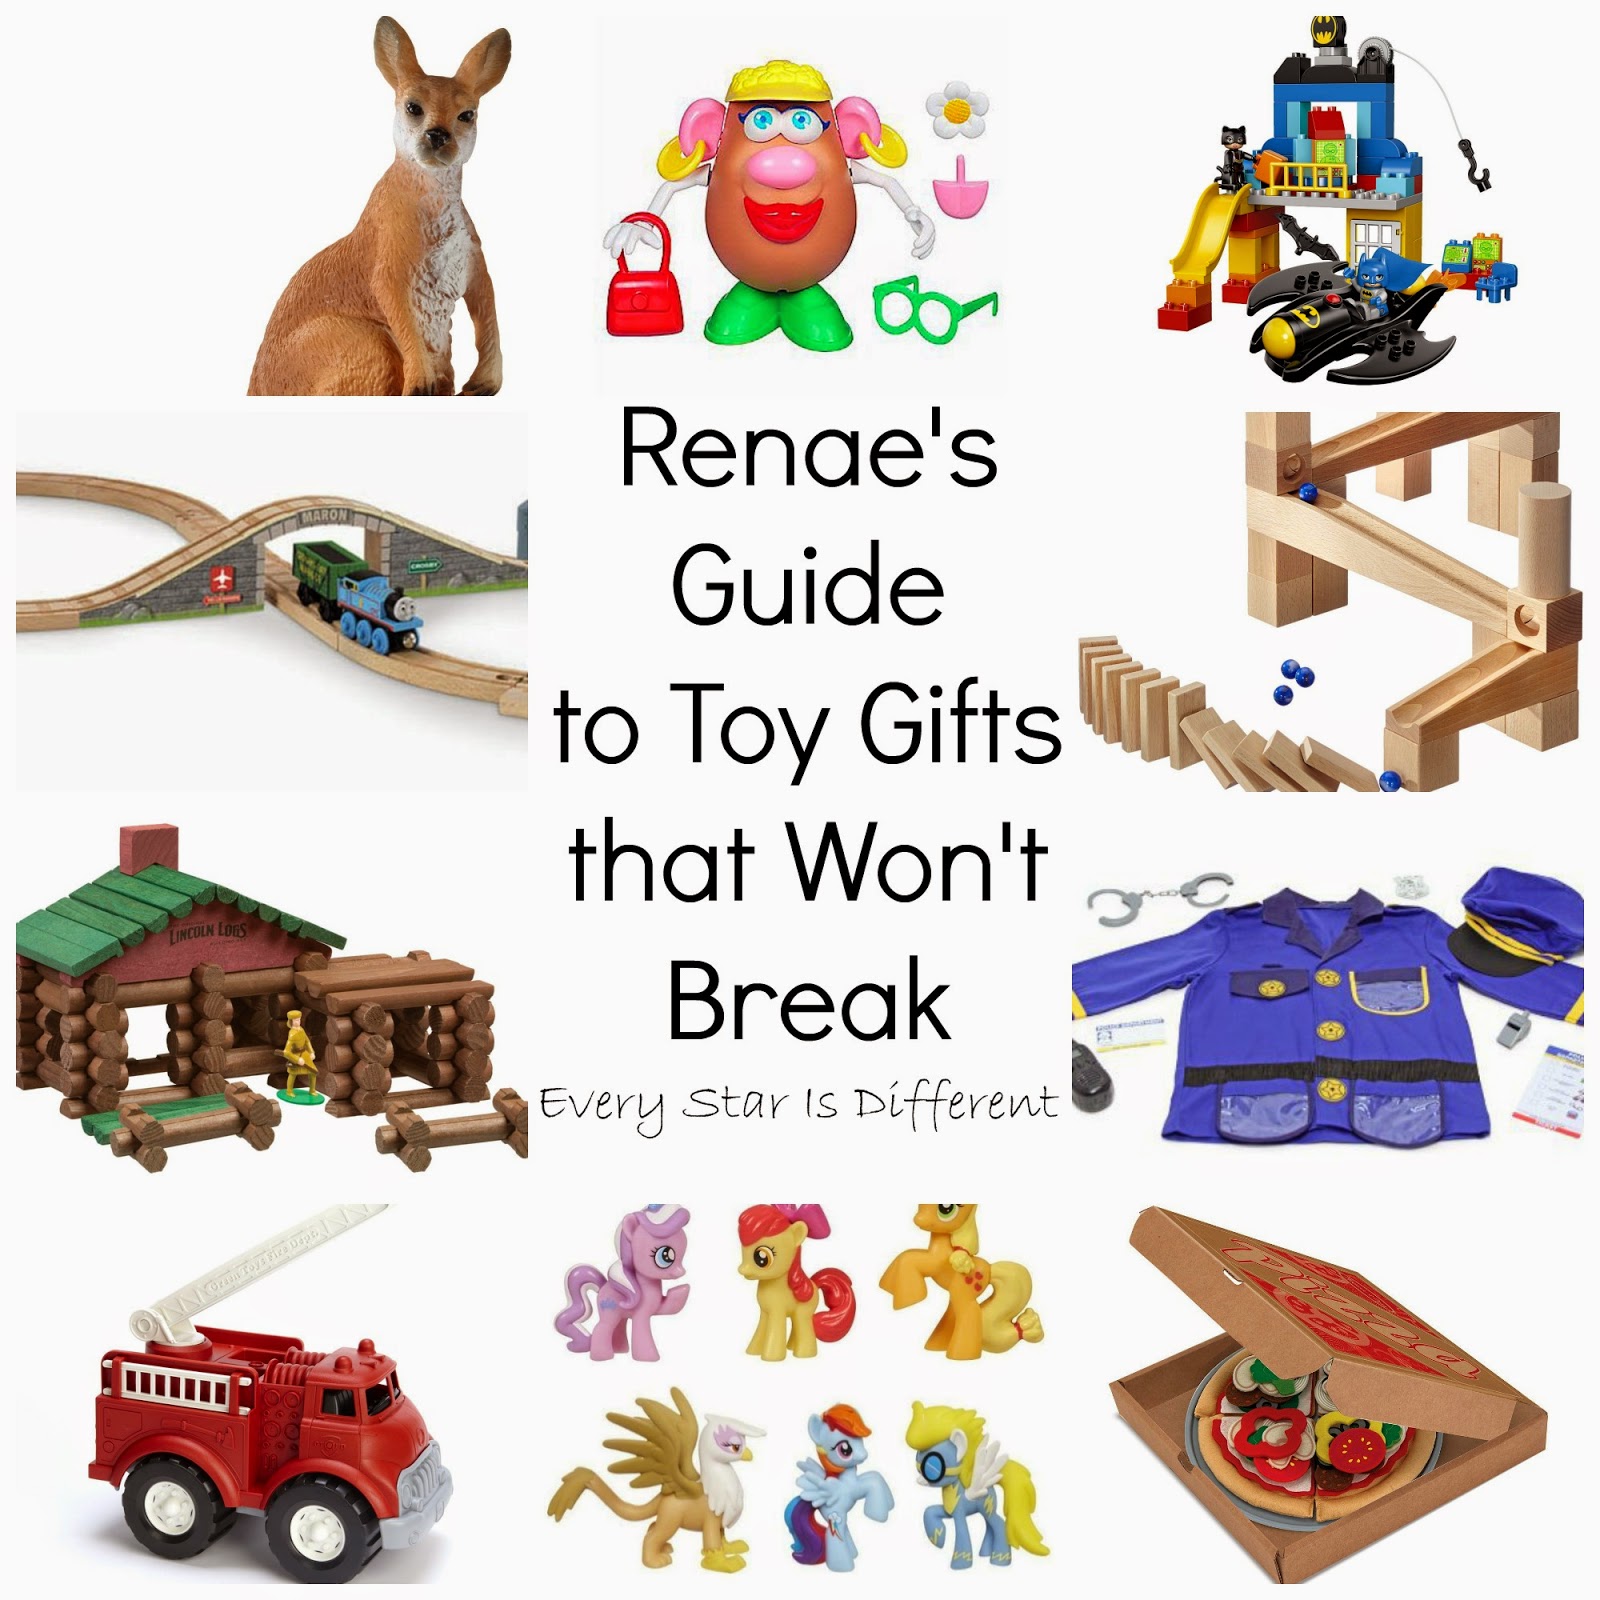 Guide to Toys that Won't Break